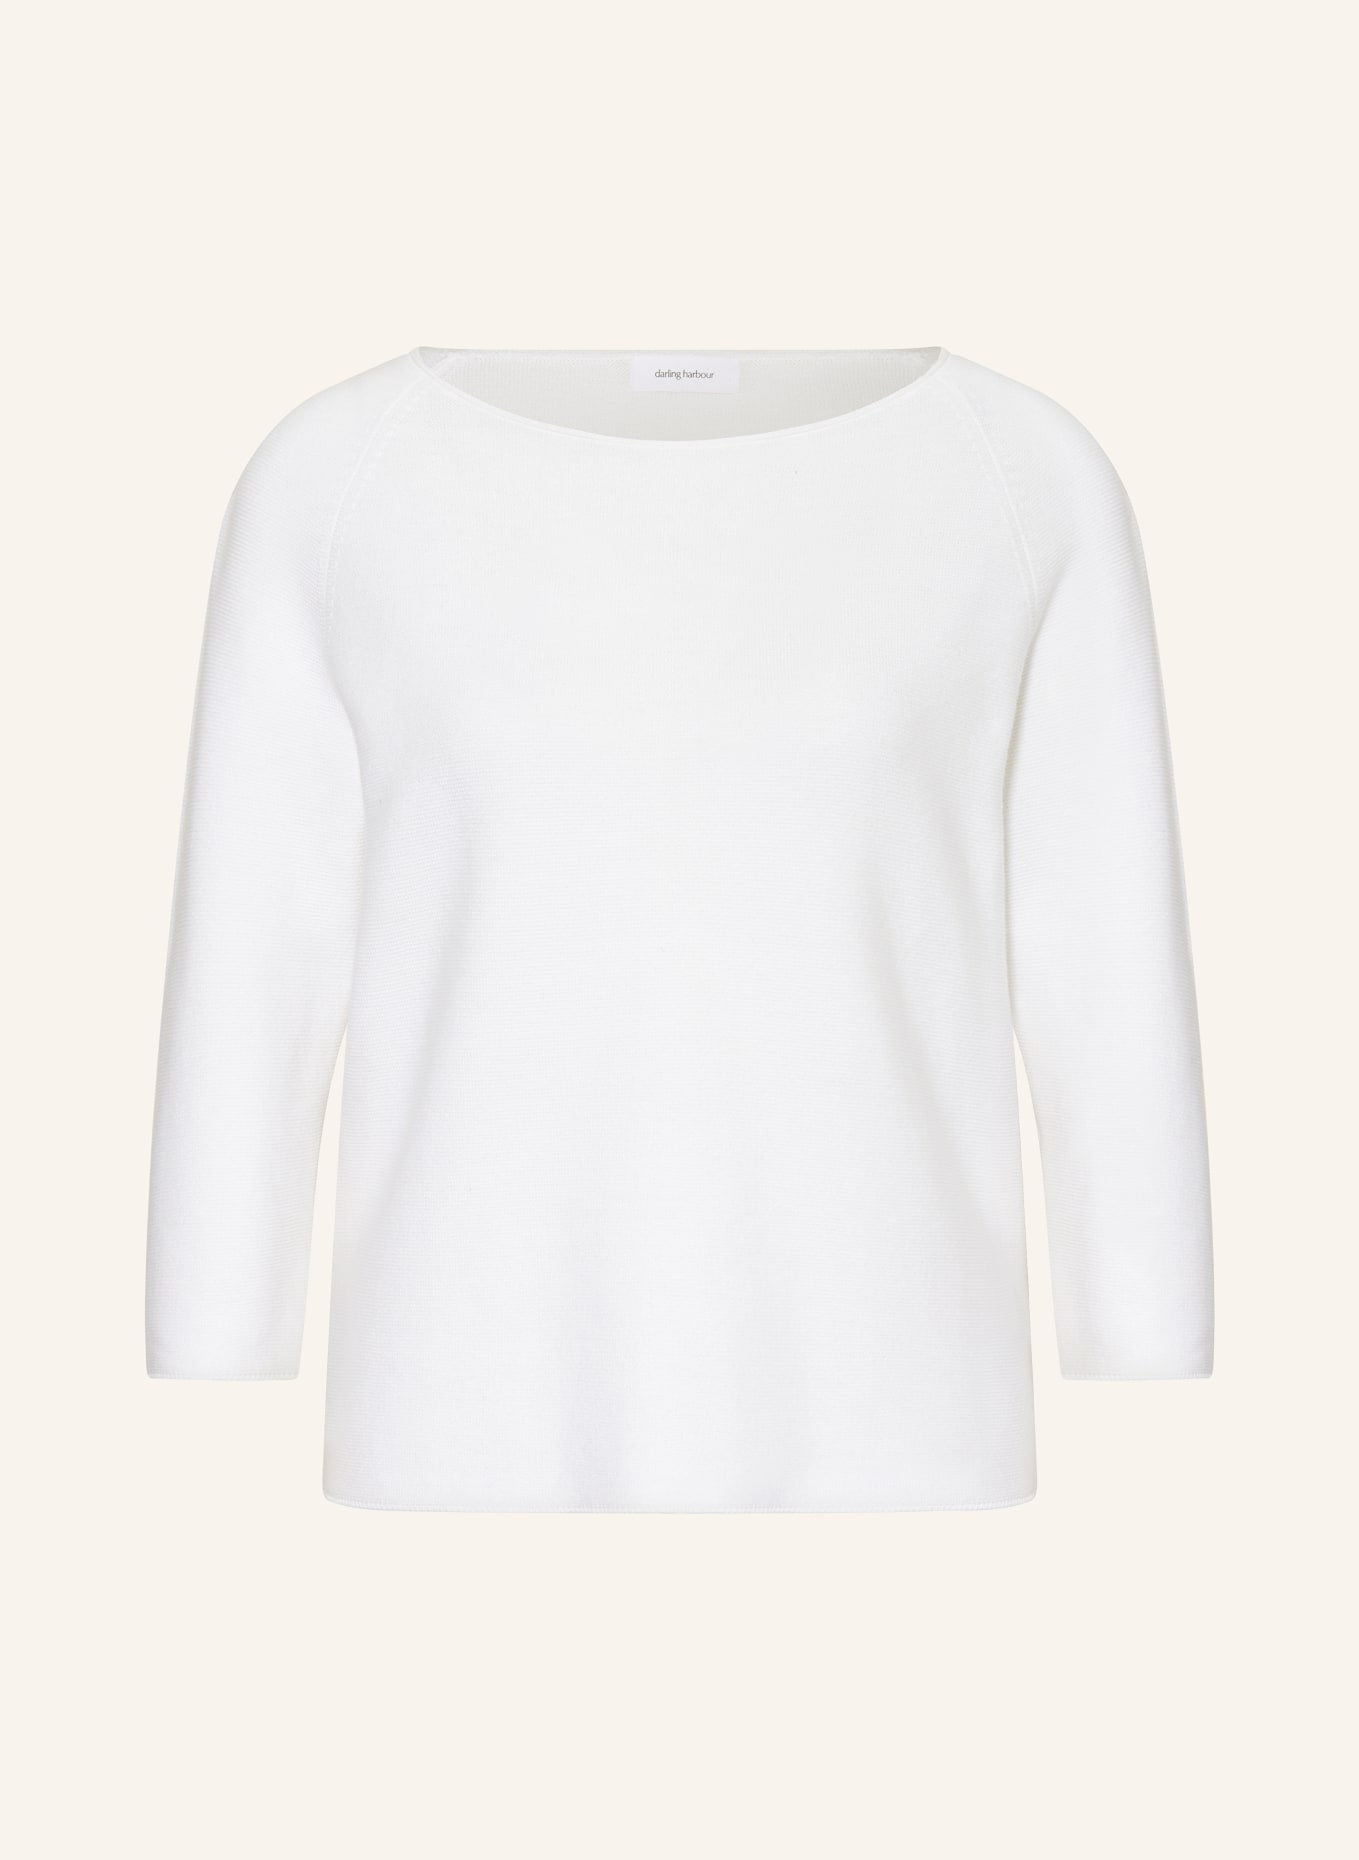 darling harbour Sweater with 3/4 sleeves, Color: WEISS (Image 1)